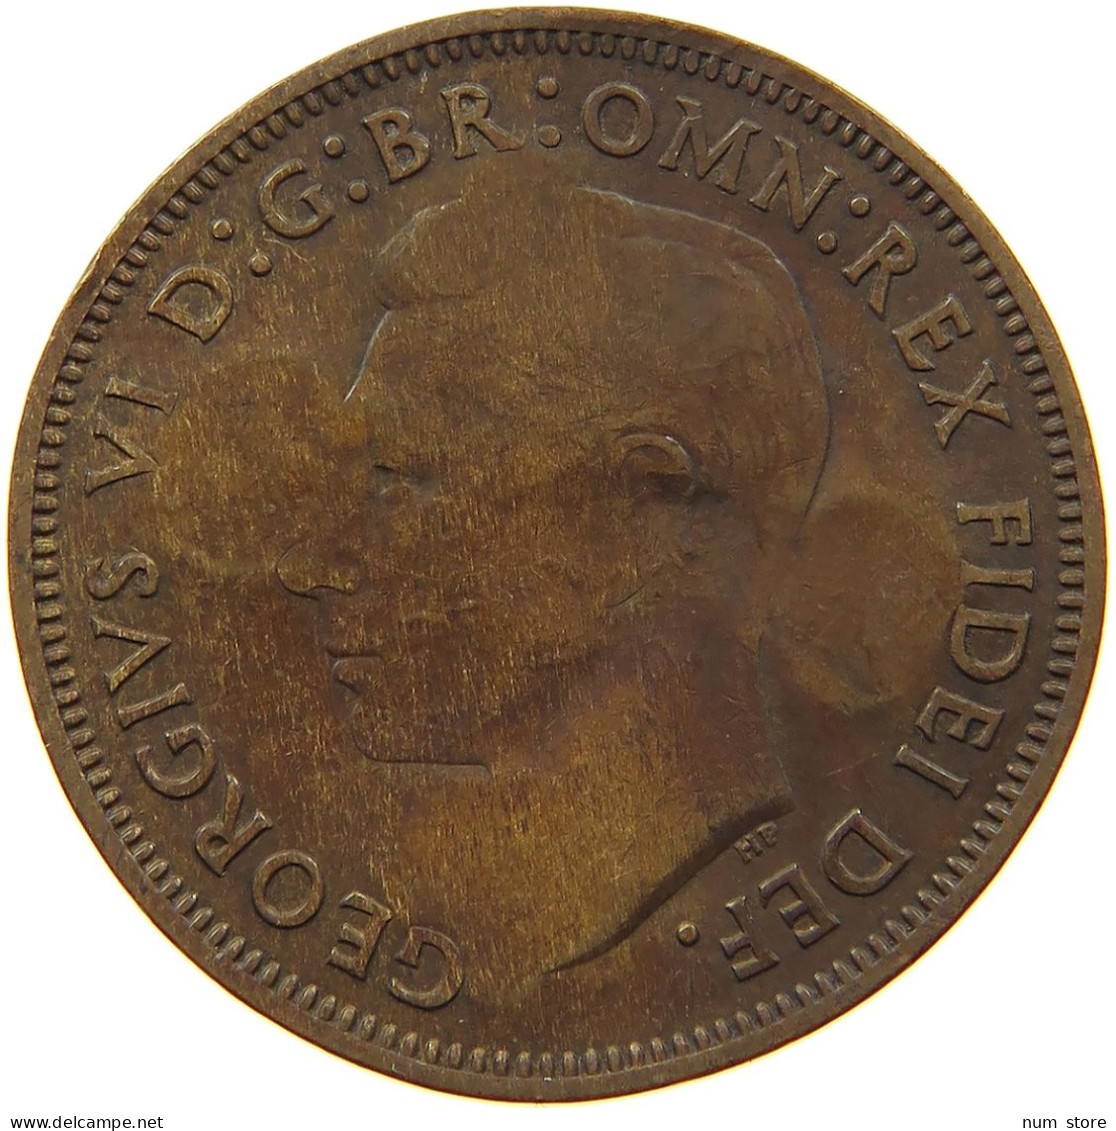 GREAT BRITAIN HALFPENNY 1949 George VI. (1936-1952) COUNTERMARKED M #a011 0345 - C. 1/2 Penny